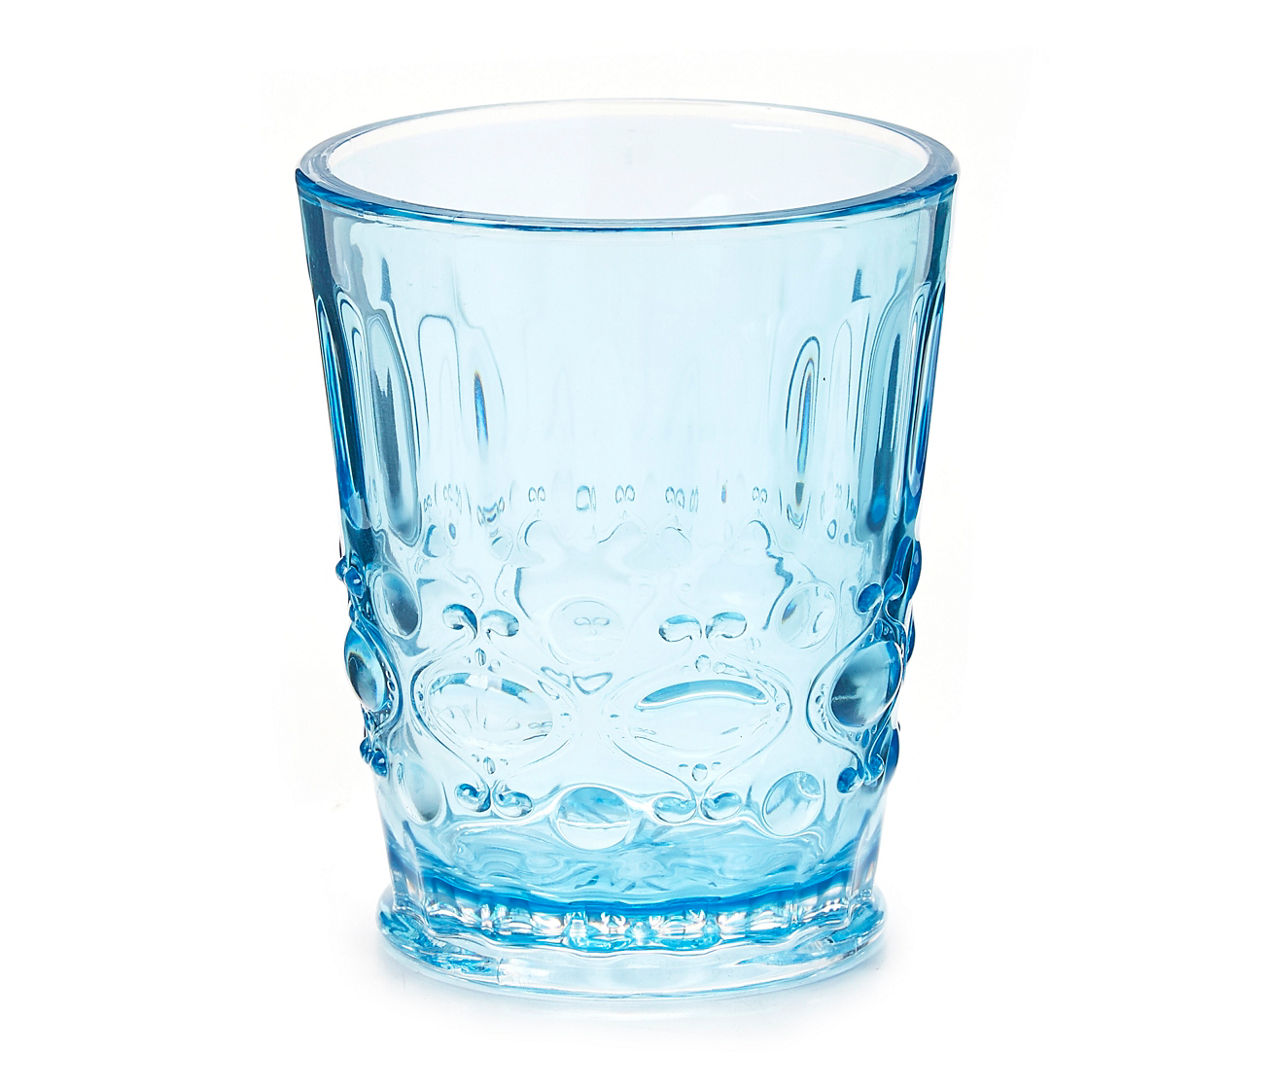 Blue Speckled Double Old Fashioned Plastic Glass, 13.5 Oz.